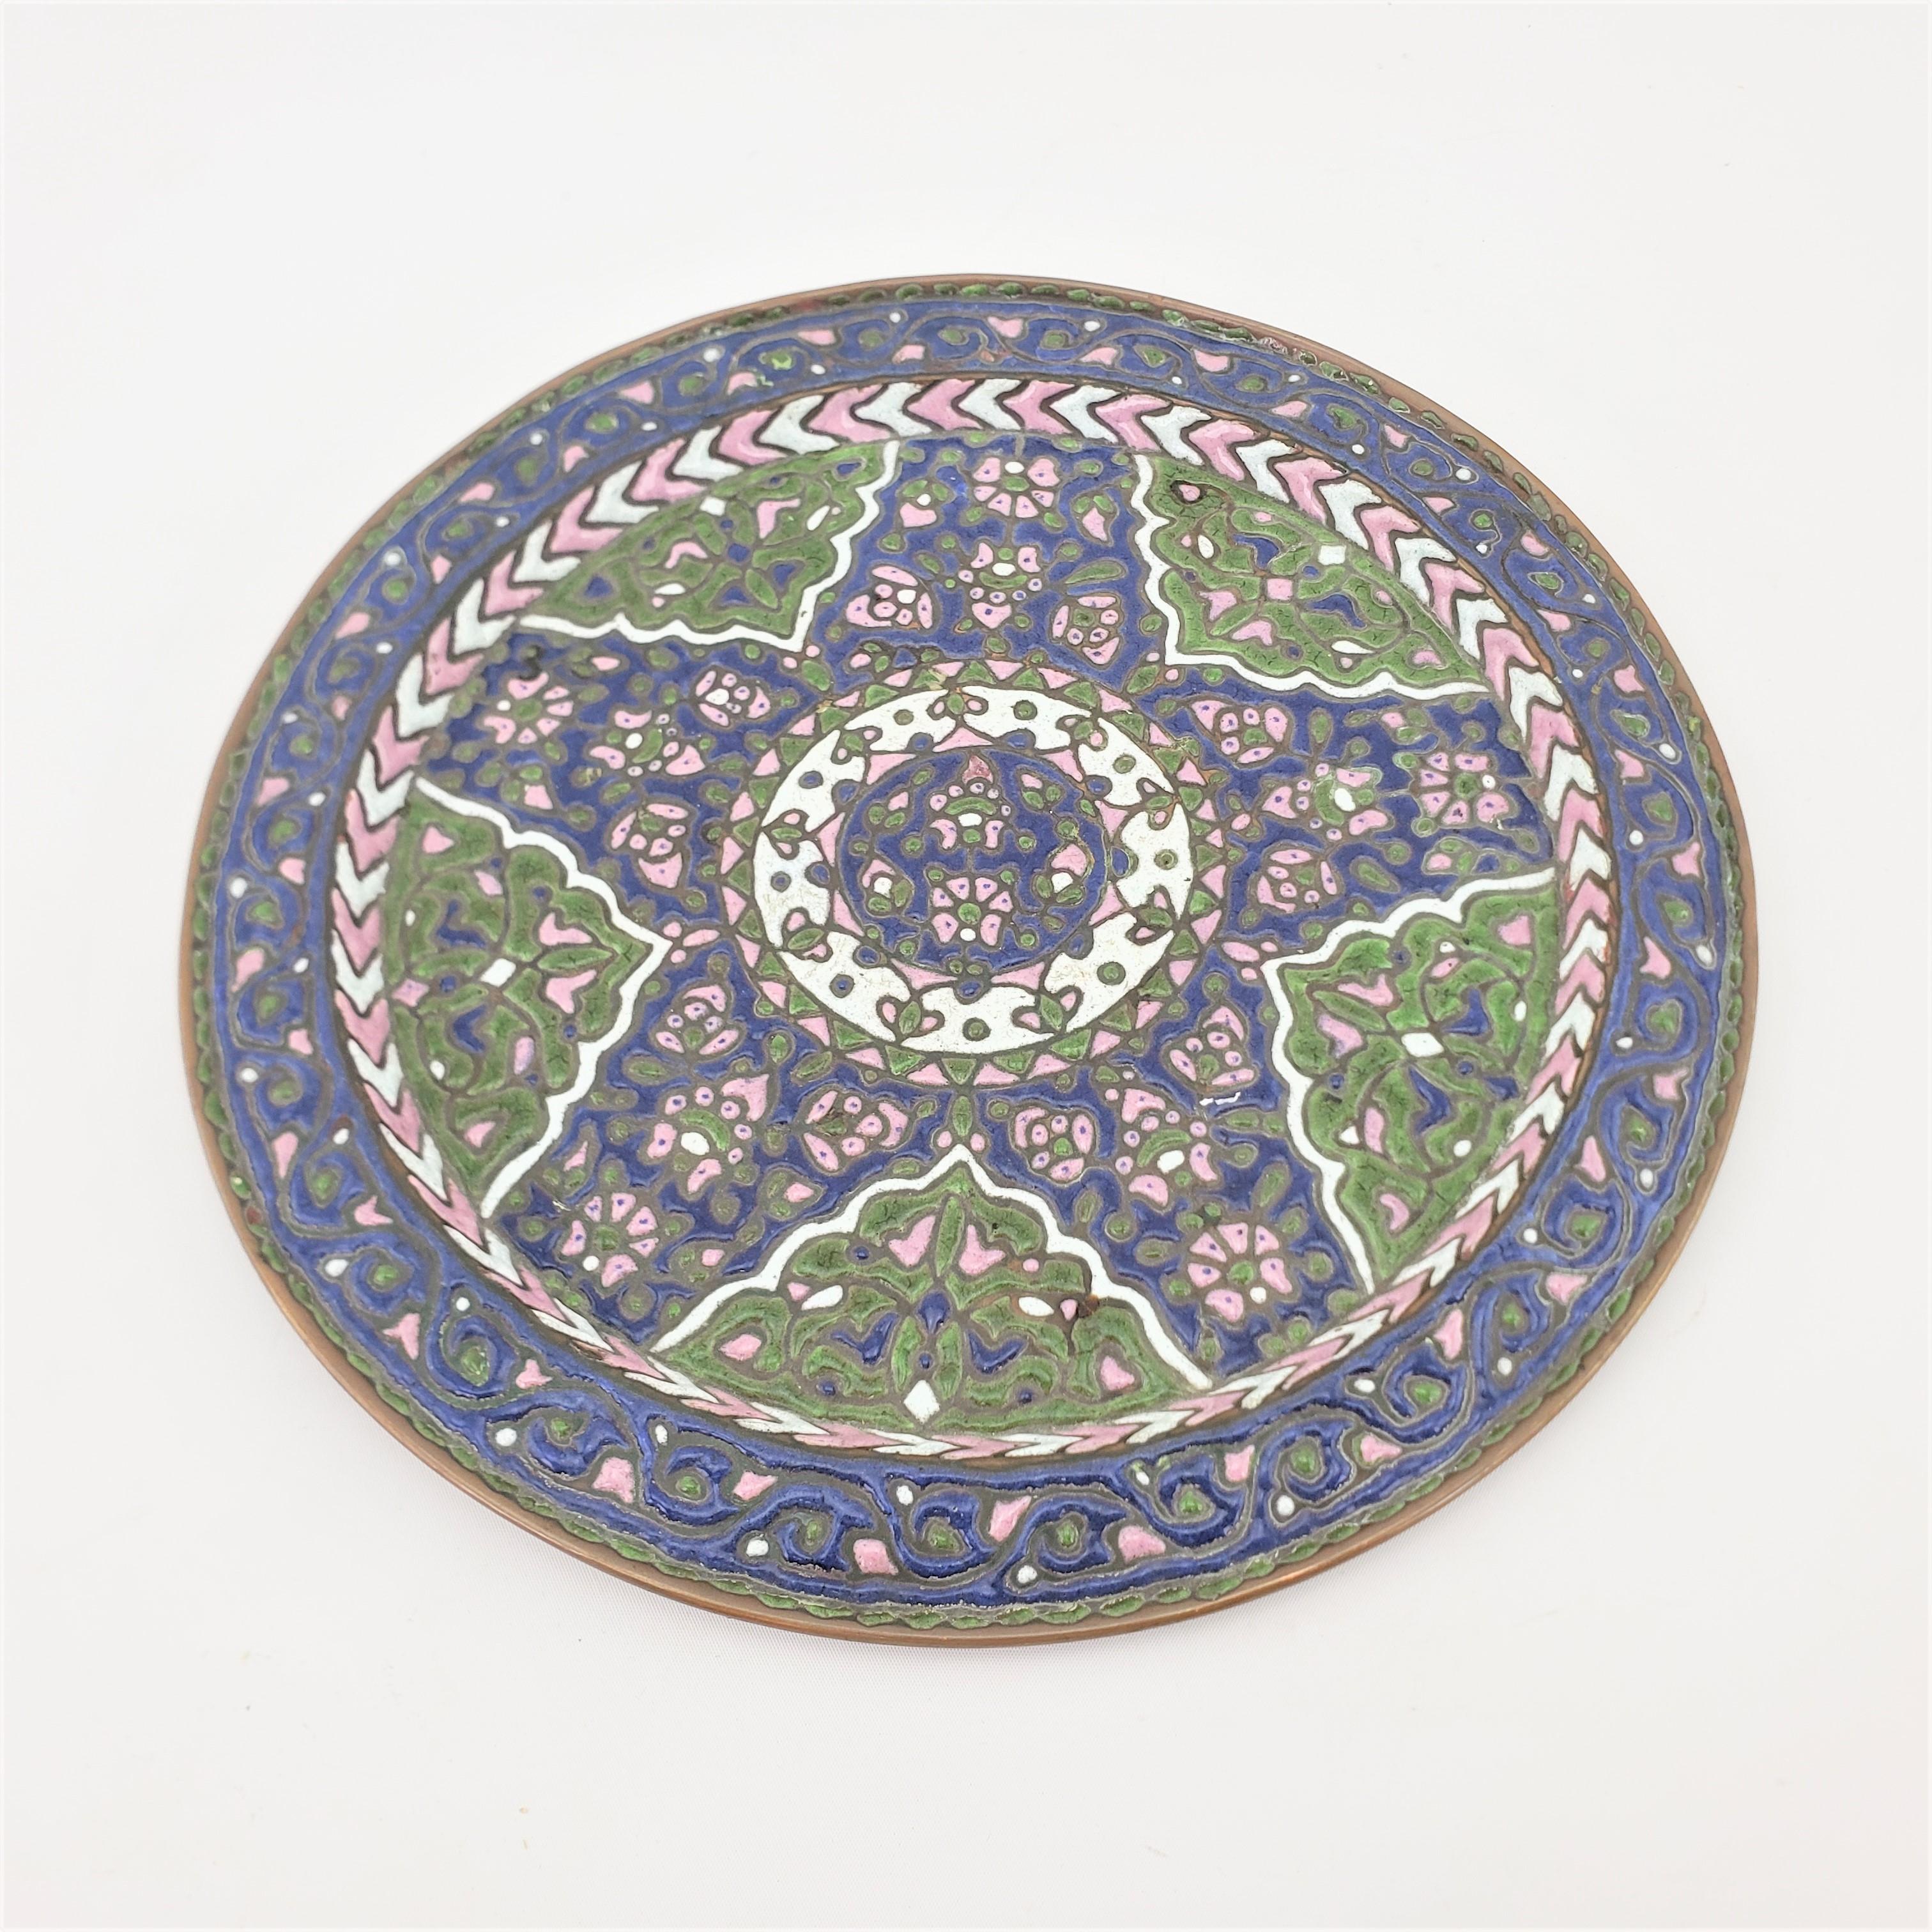 This elaborately decorated enameled brass charger or wall hanging is unsigned, but presumed to have originated from India and dating to approximately 1920 and done in an Anglo-Indian style. The plate is intricately hand-crafted with enamel